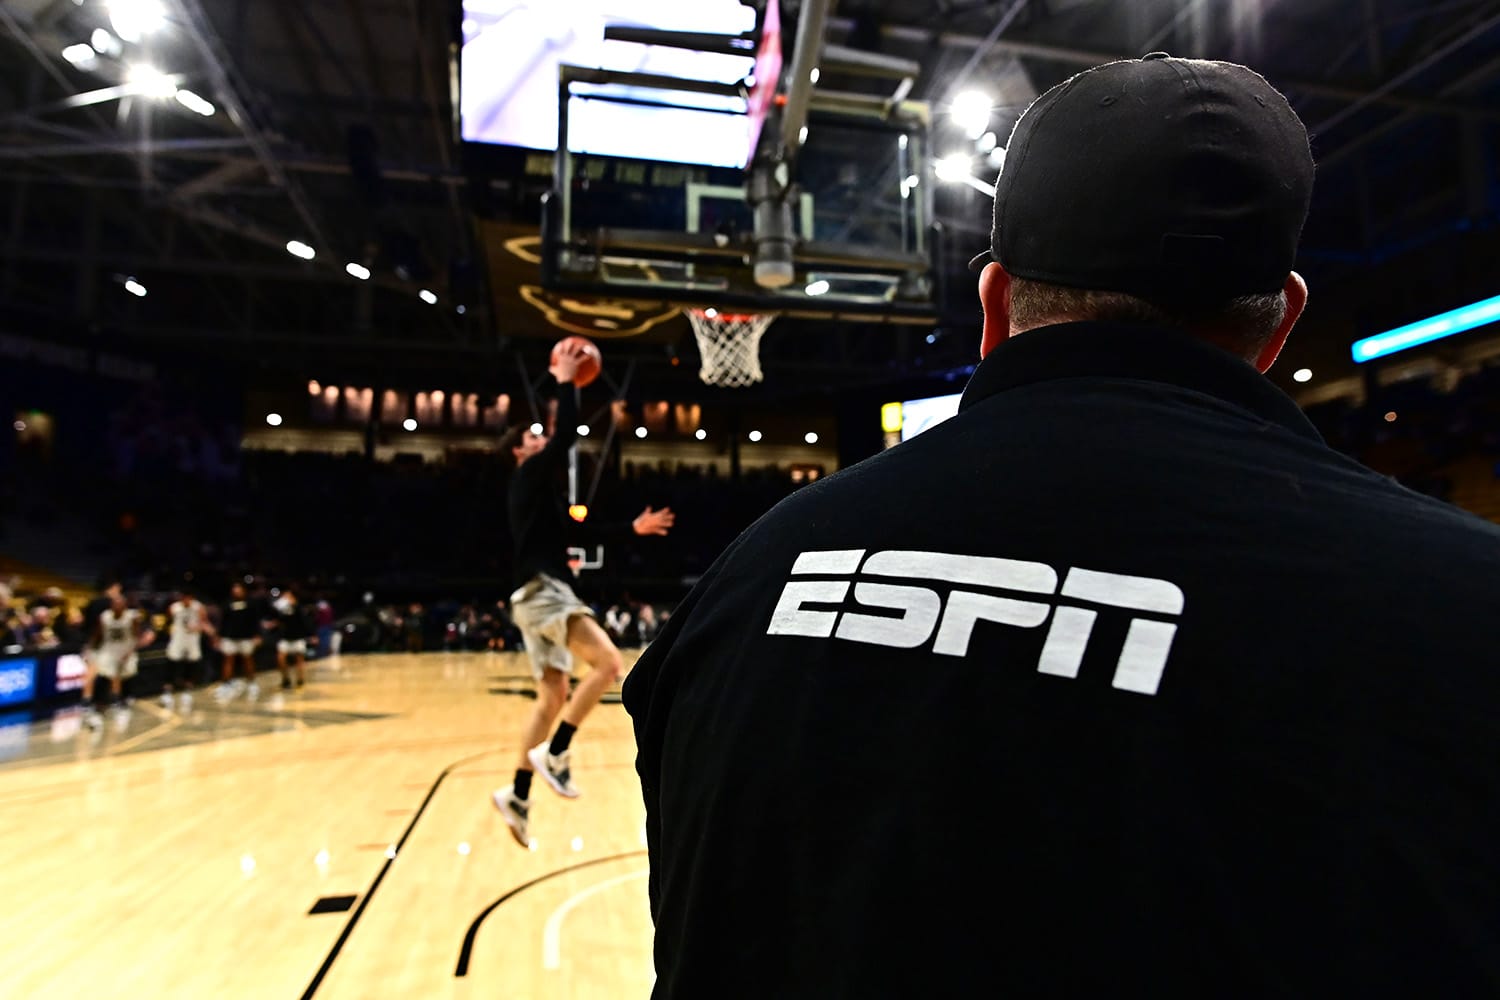 How Much Of The Sports Betting Market Can ESPN Bet Capture